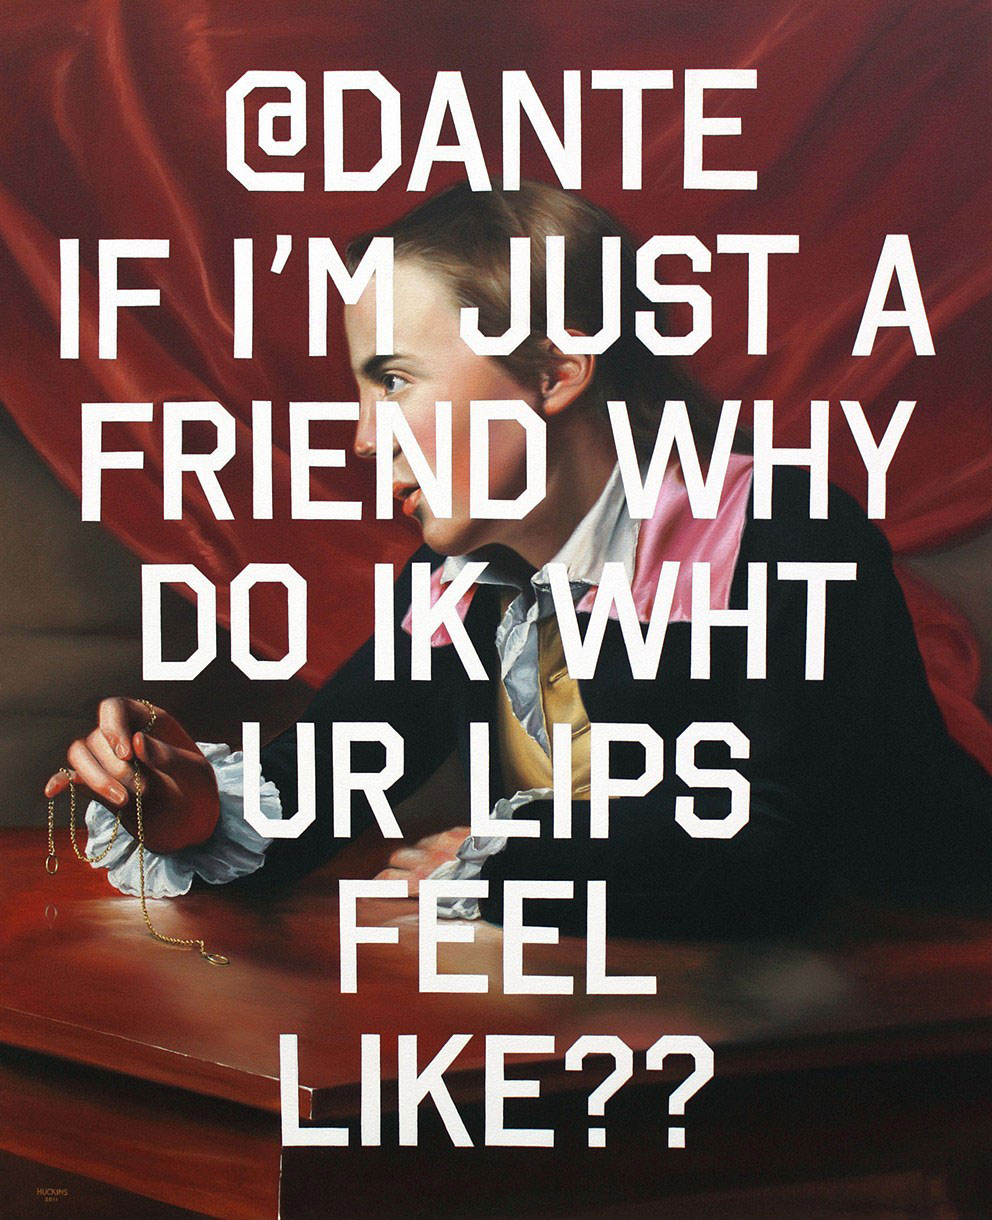 Shawn Huckins, Henry Pelham's Jocular Tweet: To Dante - If I'm Just A Friend, Why Do I Know What Your Lips Feel Like??, acrylic on canvas, 44 x 36 in (112 x 91 cm), 2011. Private collection.